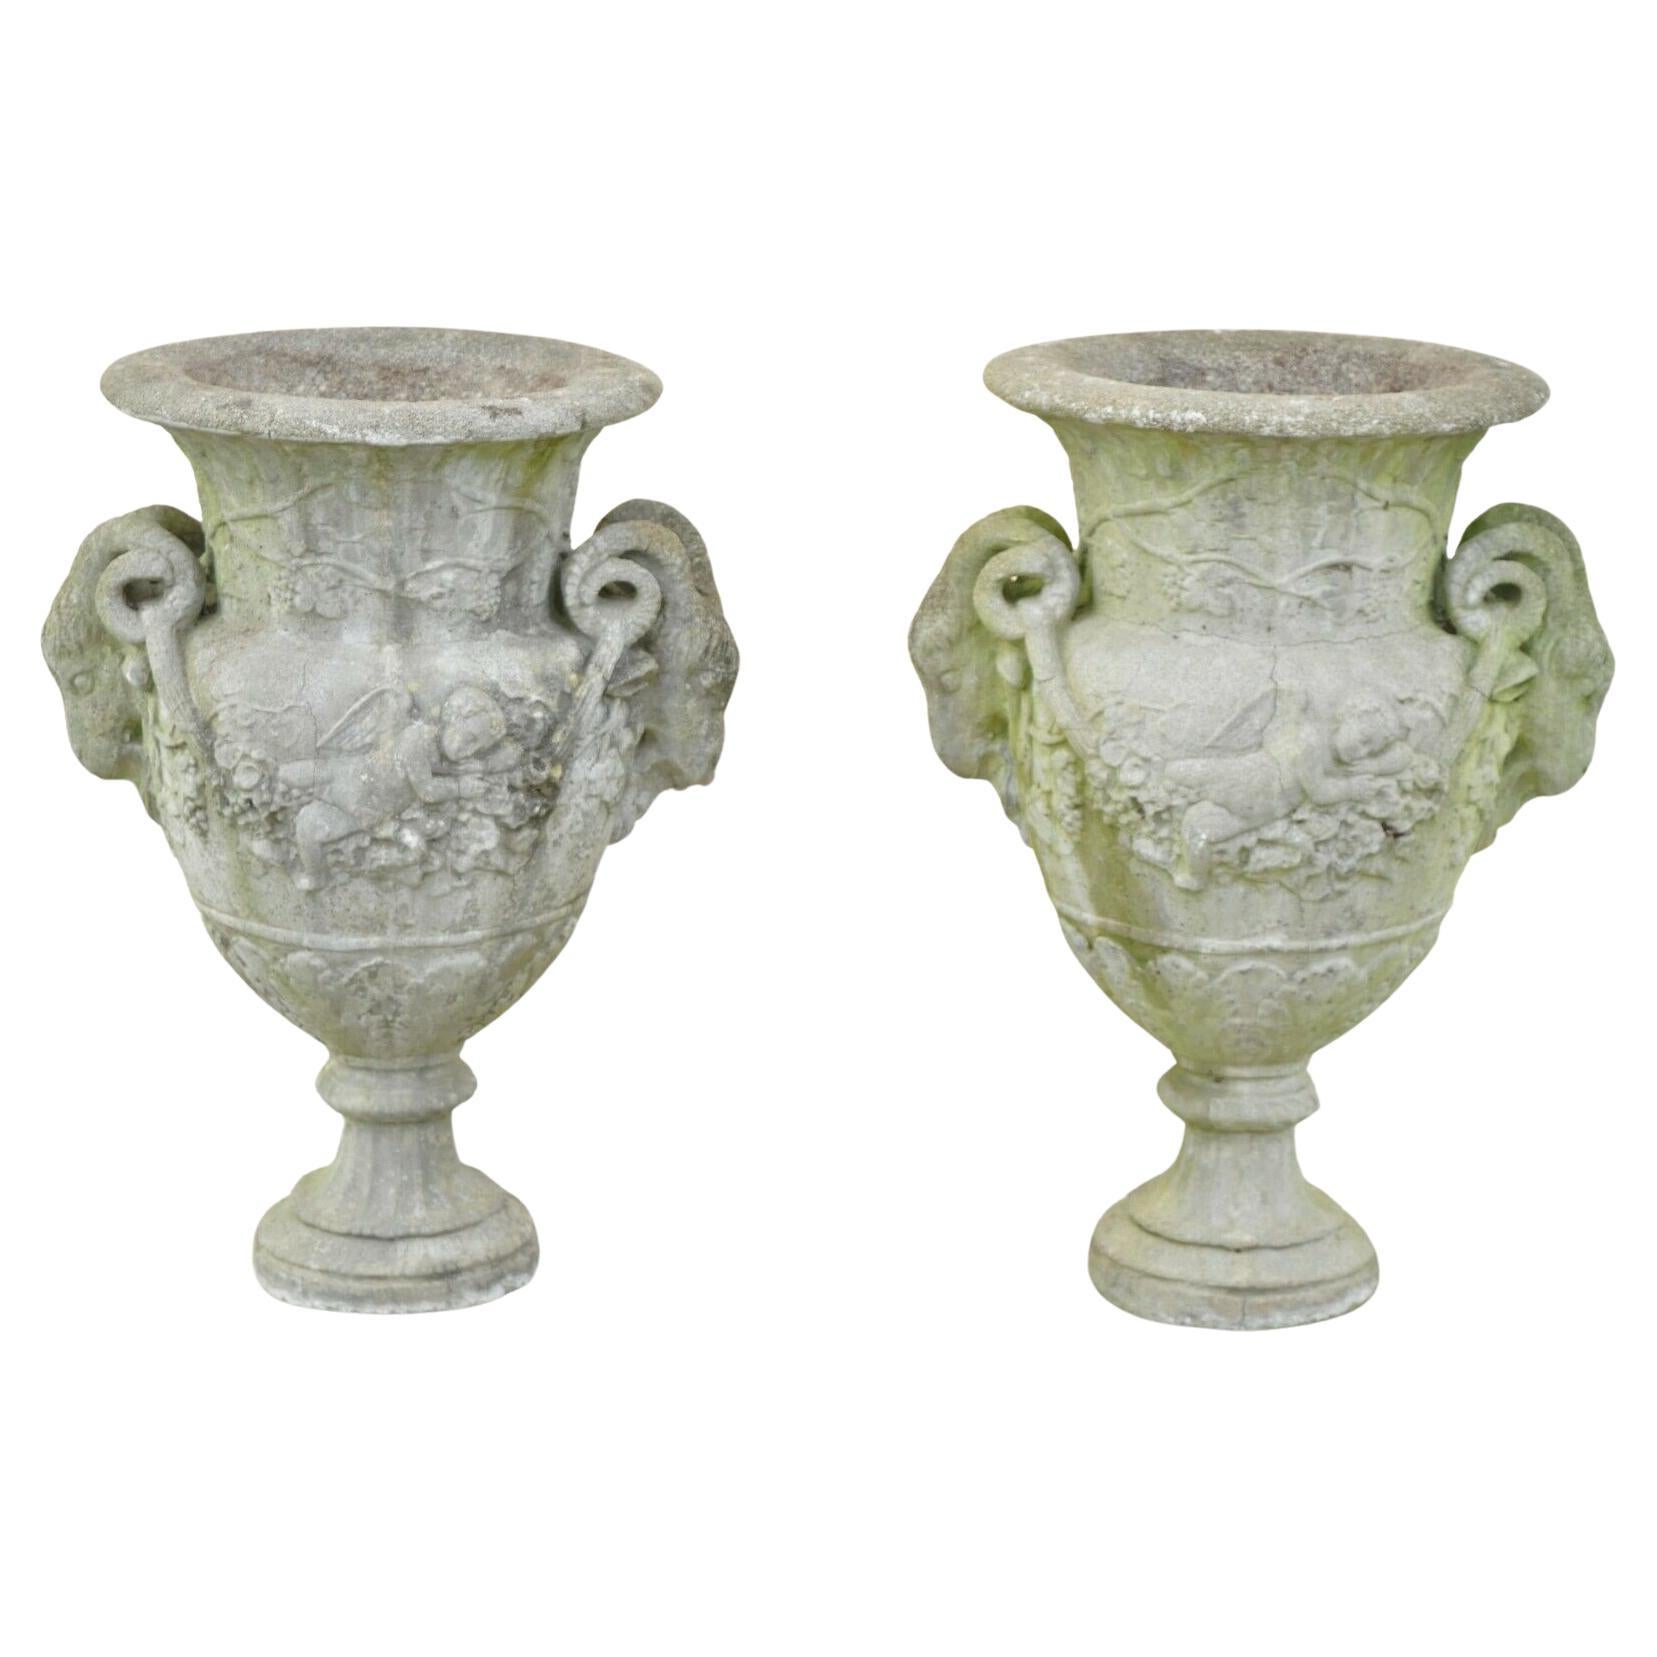 French Neoclassical Concrete Figural Cherub Rams Garden Planters, a Pair For Sale